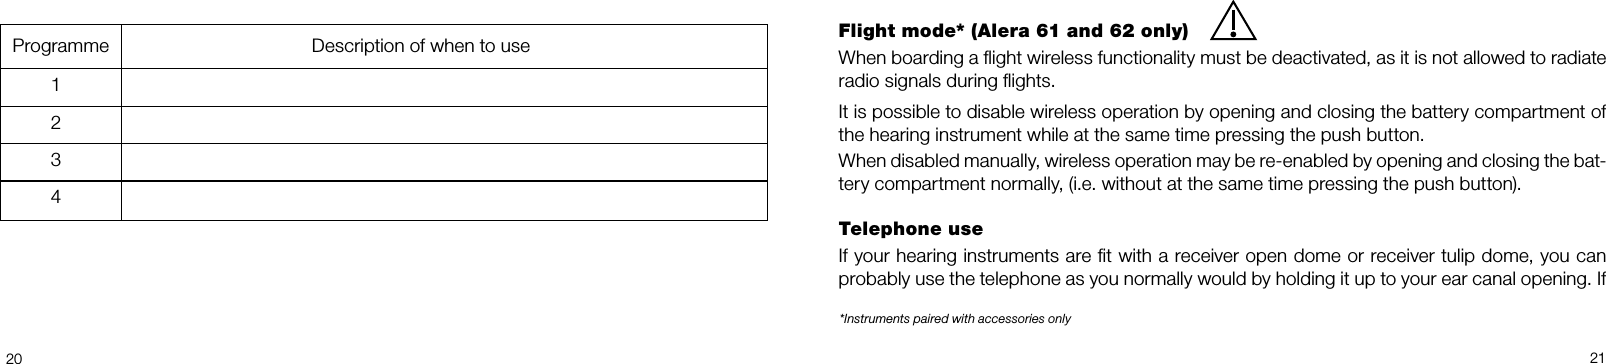  2021Programme Description of when to use1234Flight mode* (Alera 61 and 62 only)When boarding a ﬂight wireless functionality must be deactivated, as it is not allowed to radiate radio signals during ﬂights.It is possible to disable wireless operation by opening and closing the battery compartment of the hearing instrument while at the same time pressing the push button.When disabled manually, wireless operation may be re-enabled by opening and closing the bat-tery compartment normally, (i.e. without at the same time pressing the push button).Telephone useIf your hearing instruments are t with a receiver open dome or receiver tulip dome, you can probably use the telephone as you normally would by holding it up to your ear canal opening. If *Instruments paired with accessories only